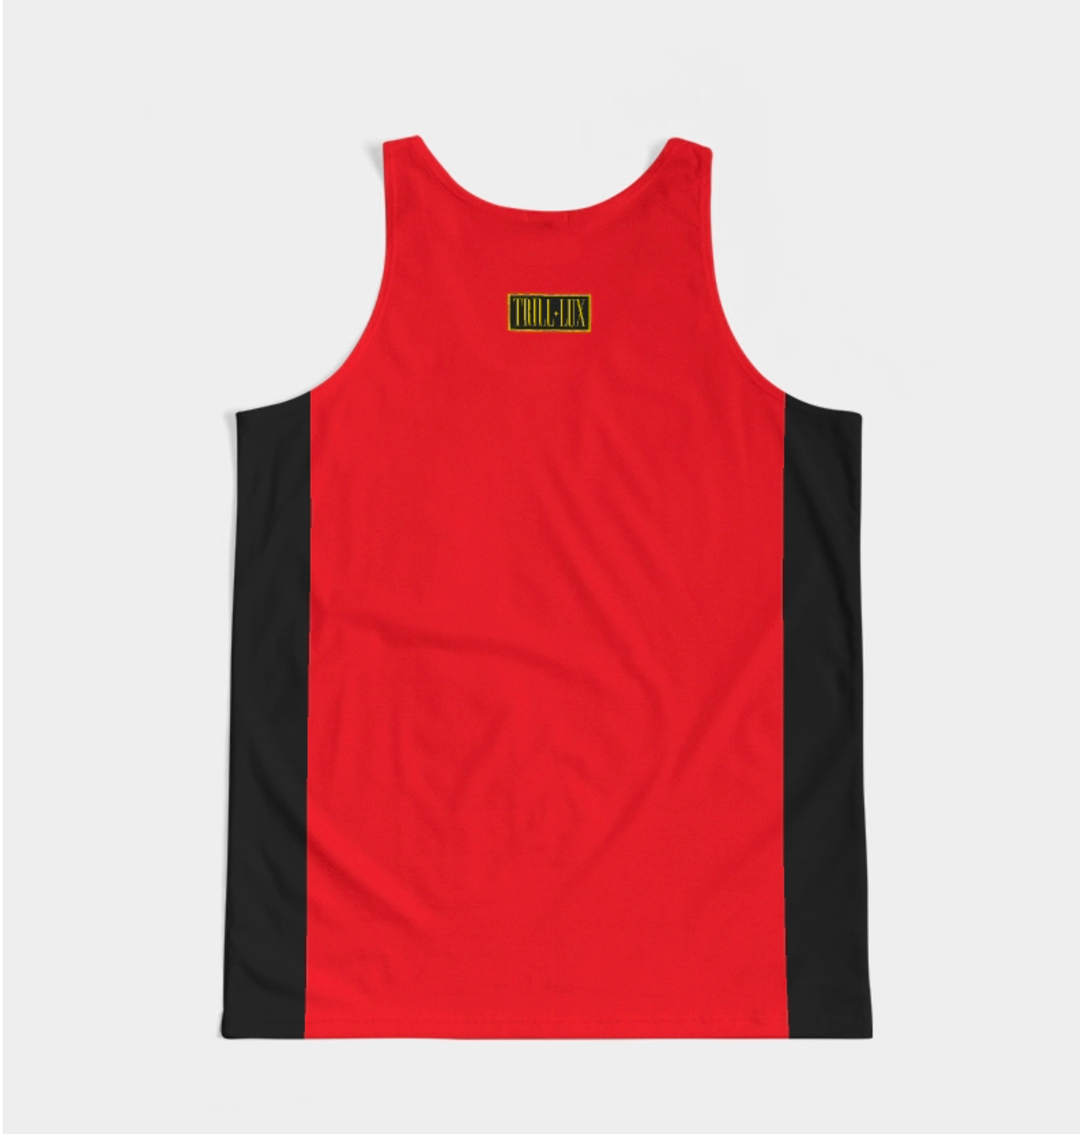 No Hand Outs | Air Jordan 9 Chile Red  Inspired fragment Tank Top